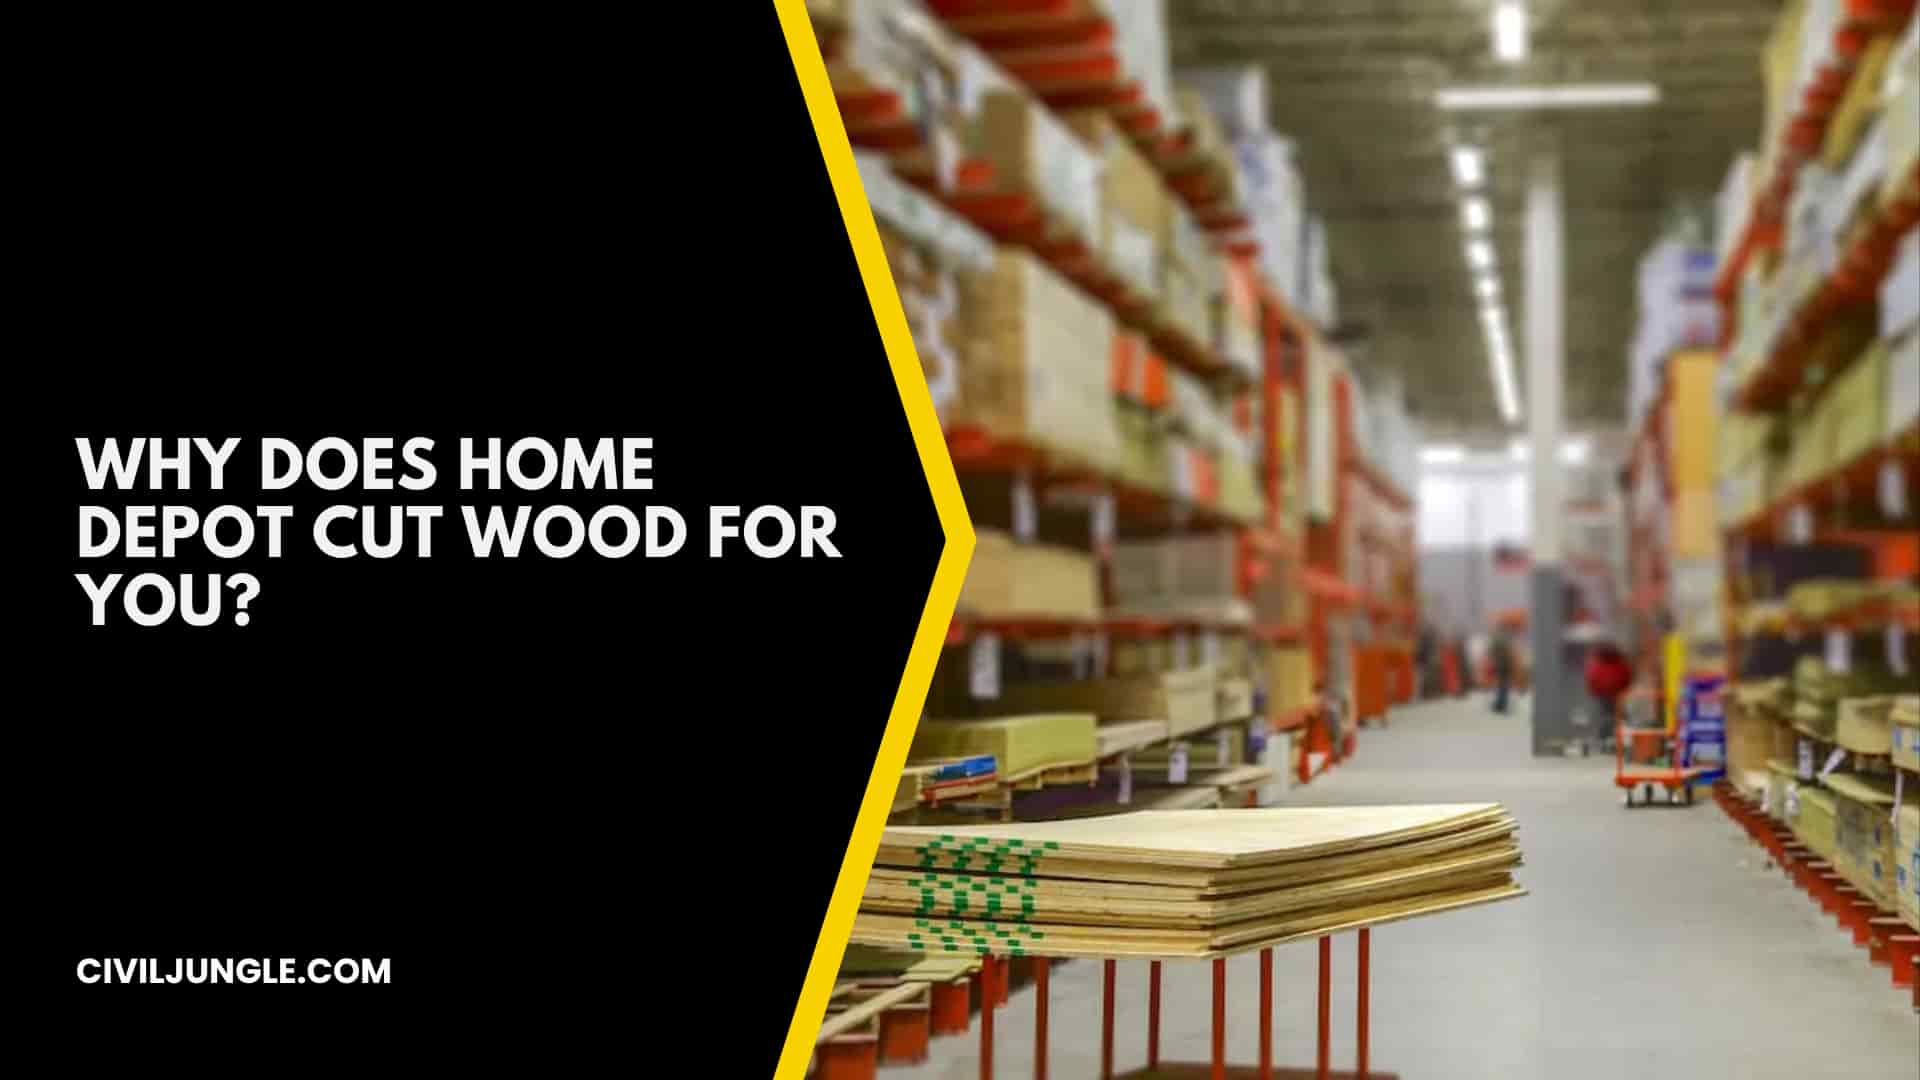 Why Does Home Depot Cut Wood For You?